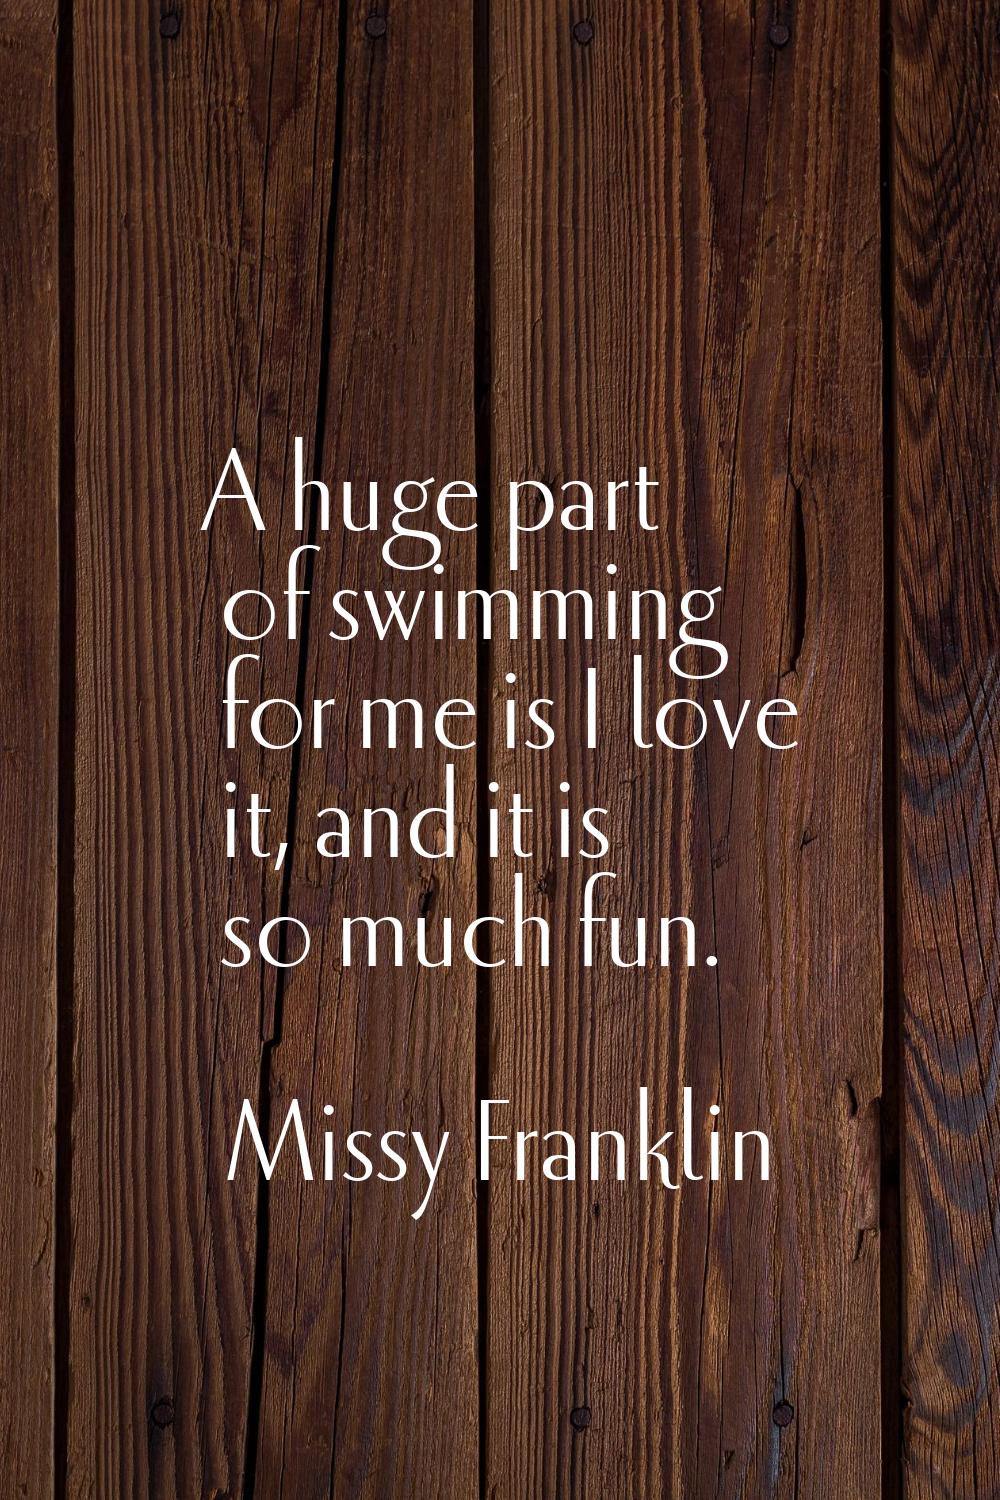 A huge part of swimming for me is I love it, and it is so much fun.